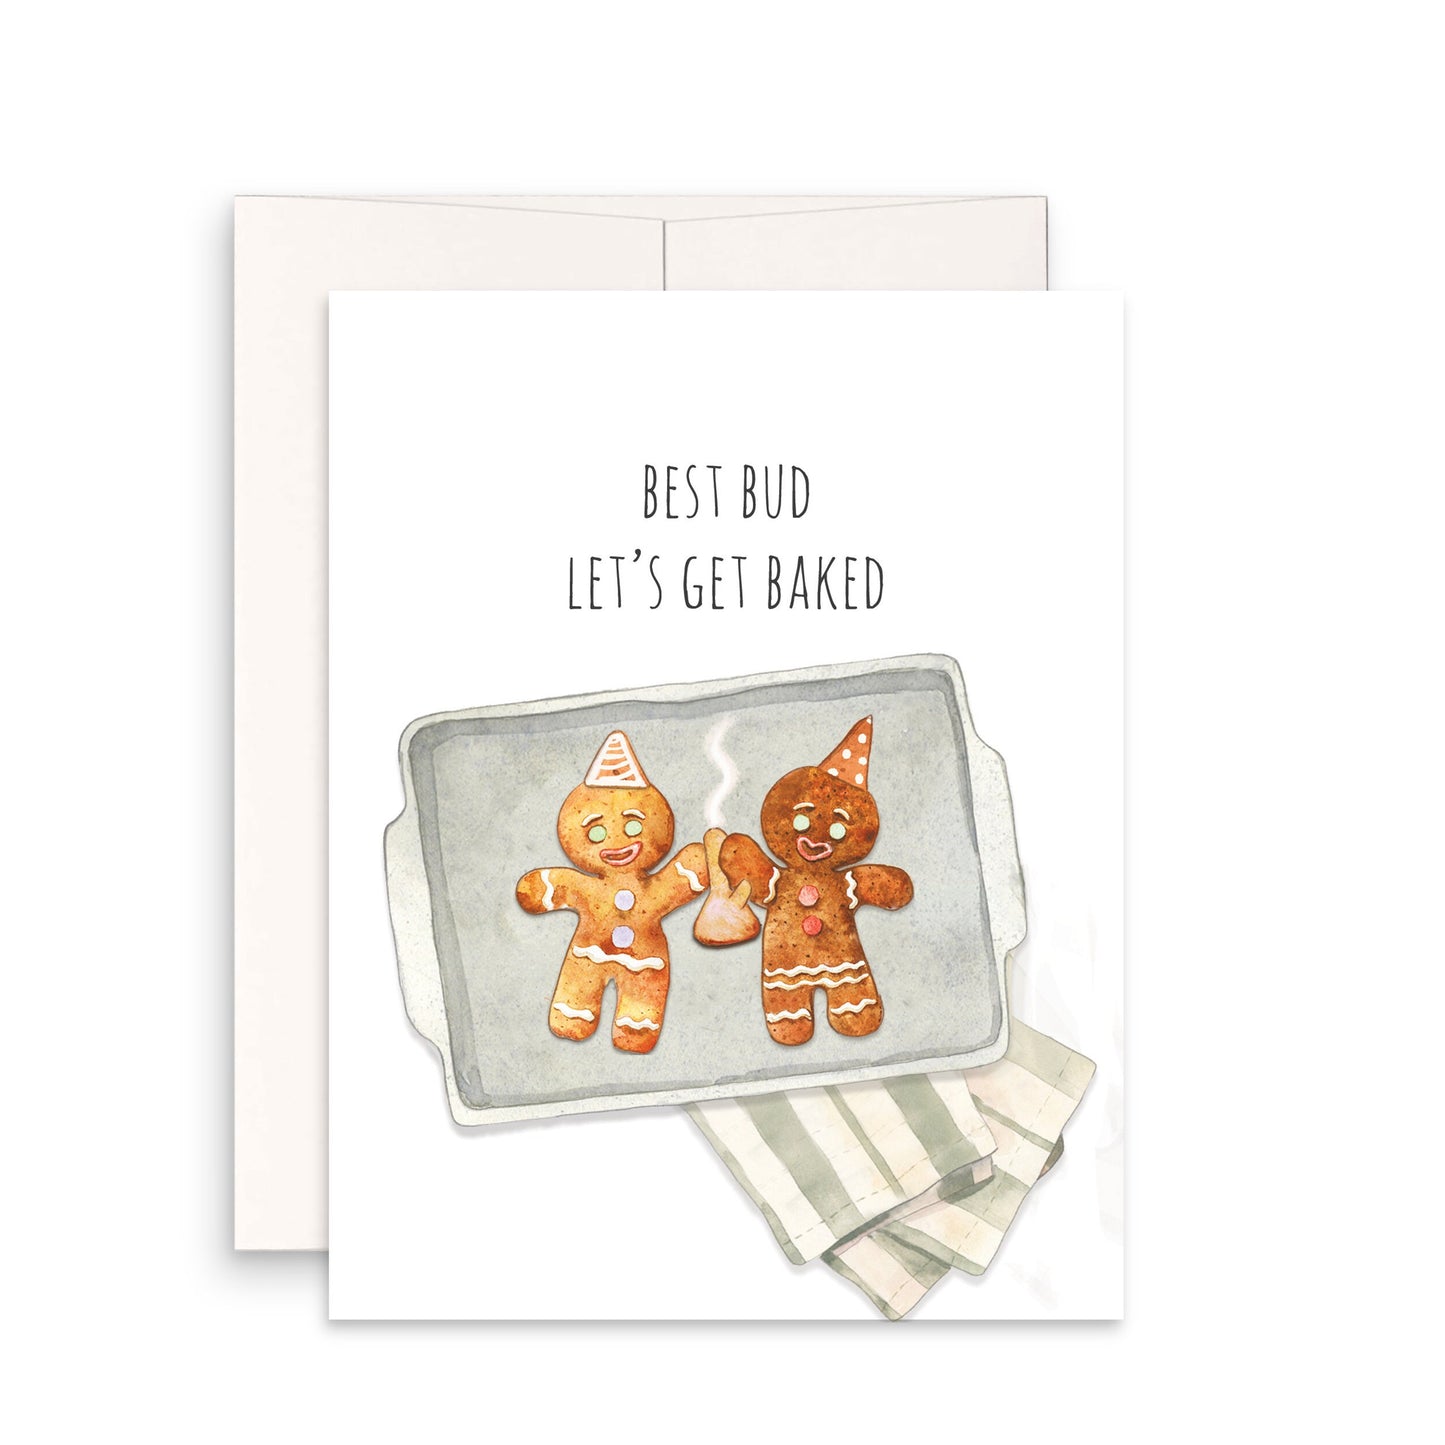 Weed Funny Birthday Cards For Friends - Best Buds Let's Get Baked - 420 Stoner Gifts For Her